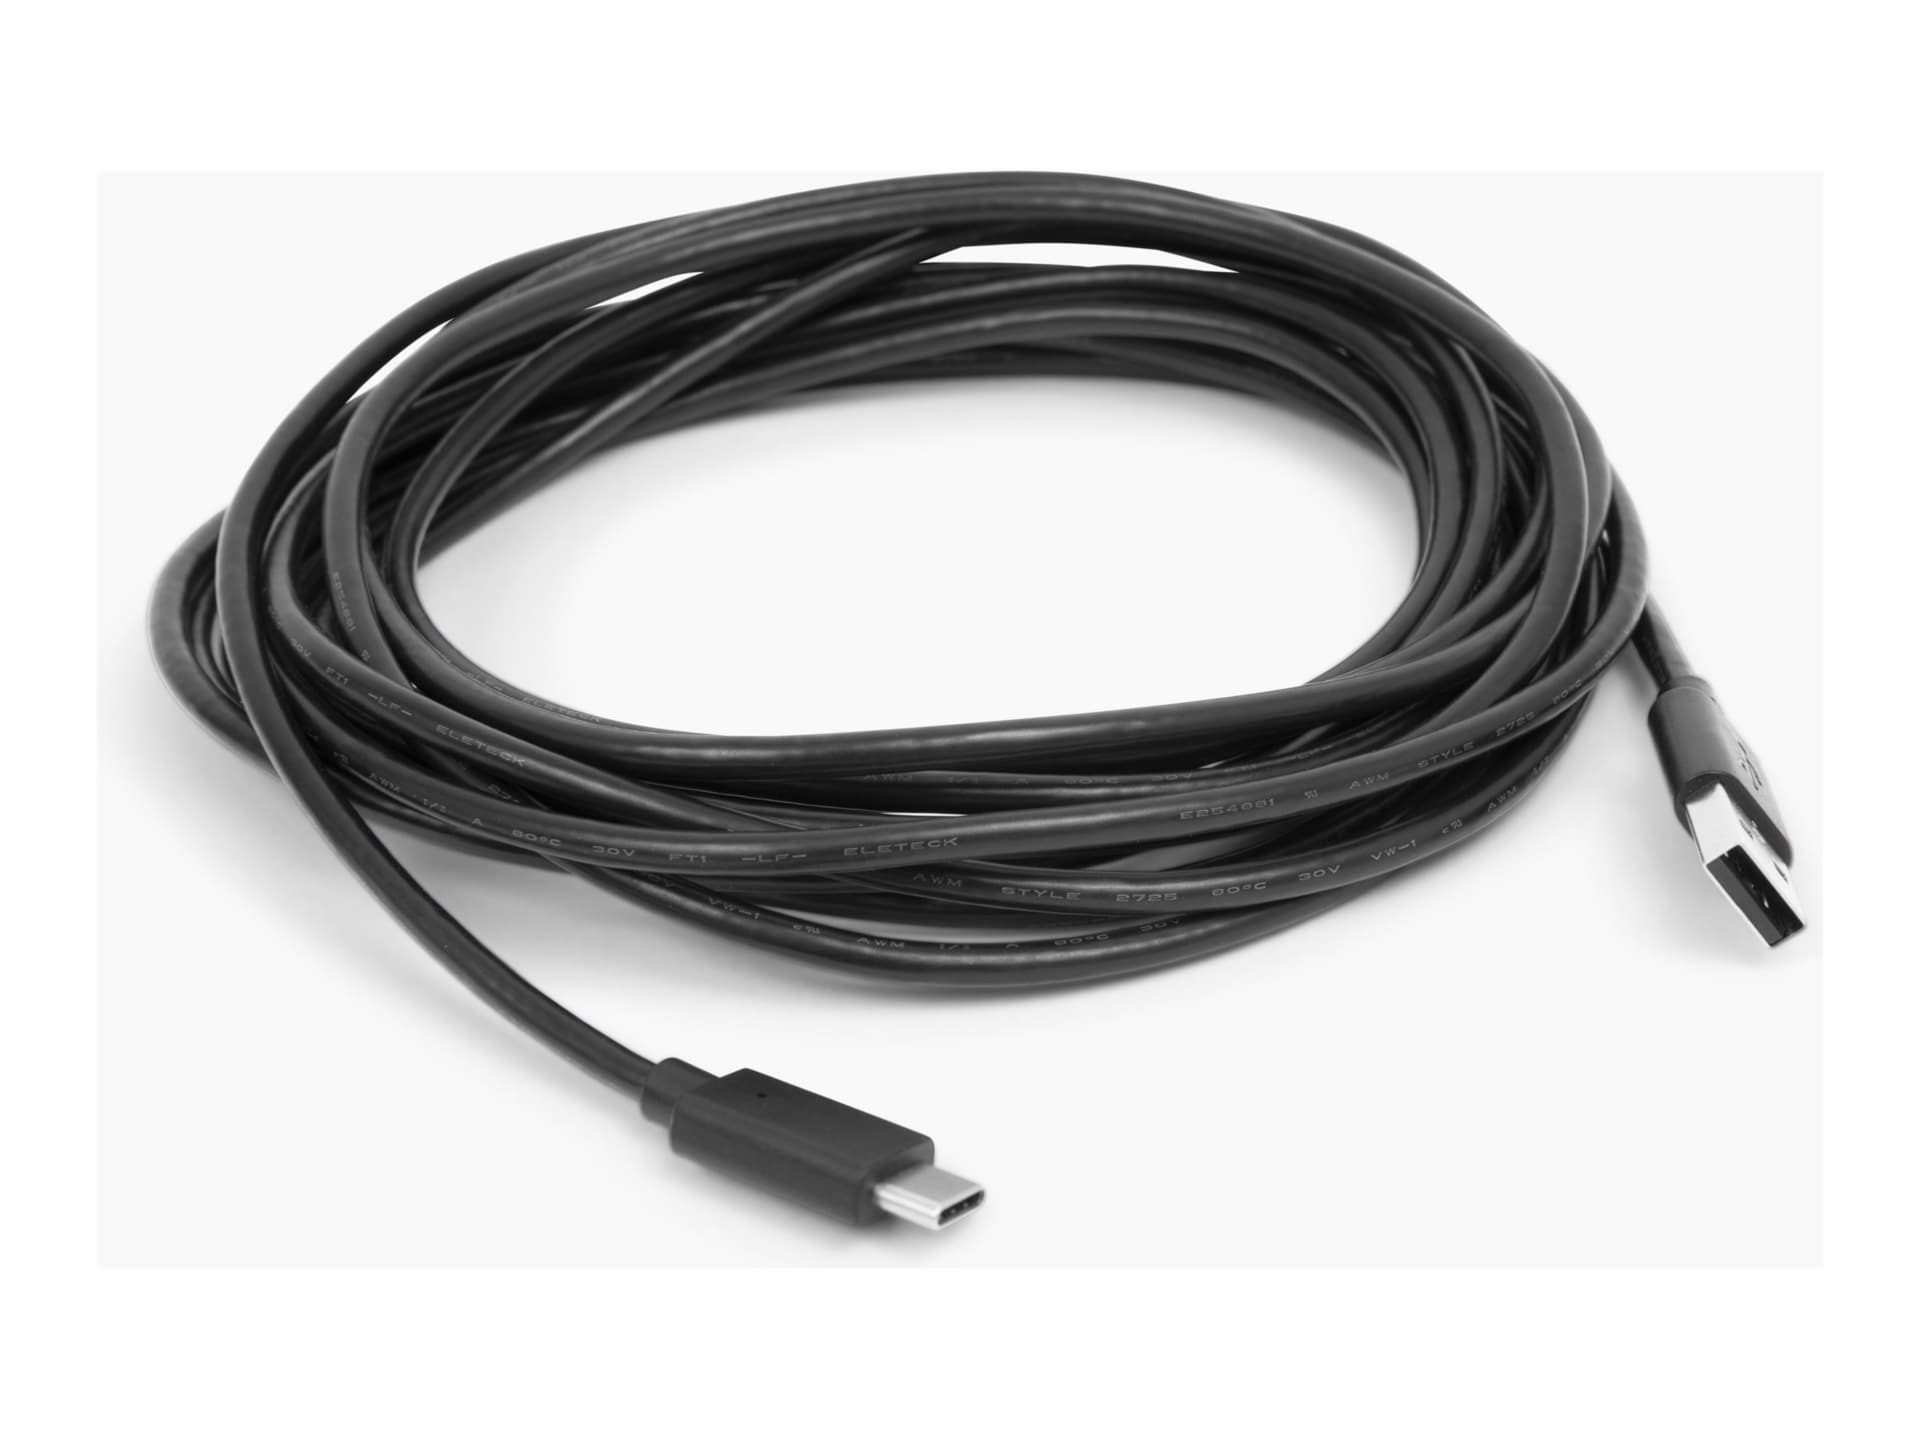 Owl Labs - USB-C cable - 24 pin USB-C to USB - 5 m